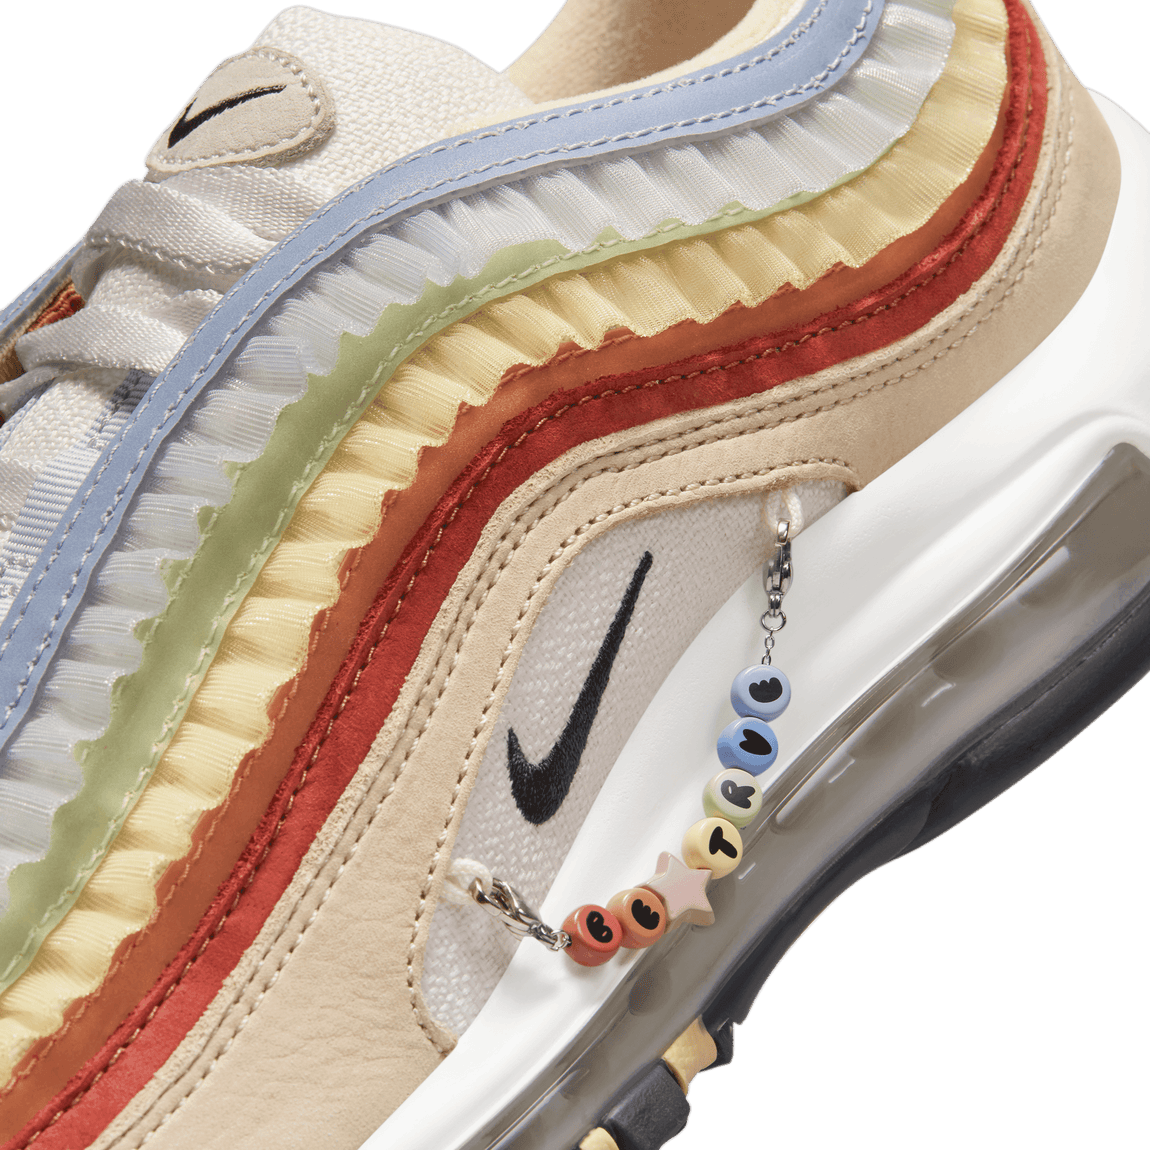 Nike Air Max 97 Be True (Pink Oxford/Anthracite-Adobe) 6/1 - Nike Air Max 97 Be True (Pink Oxford/Anthracite-Adobe) 6/1 - 